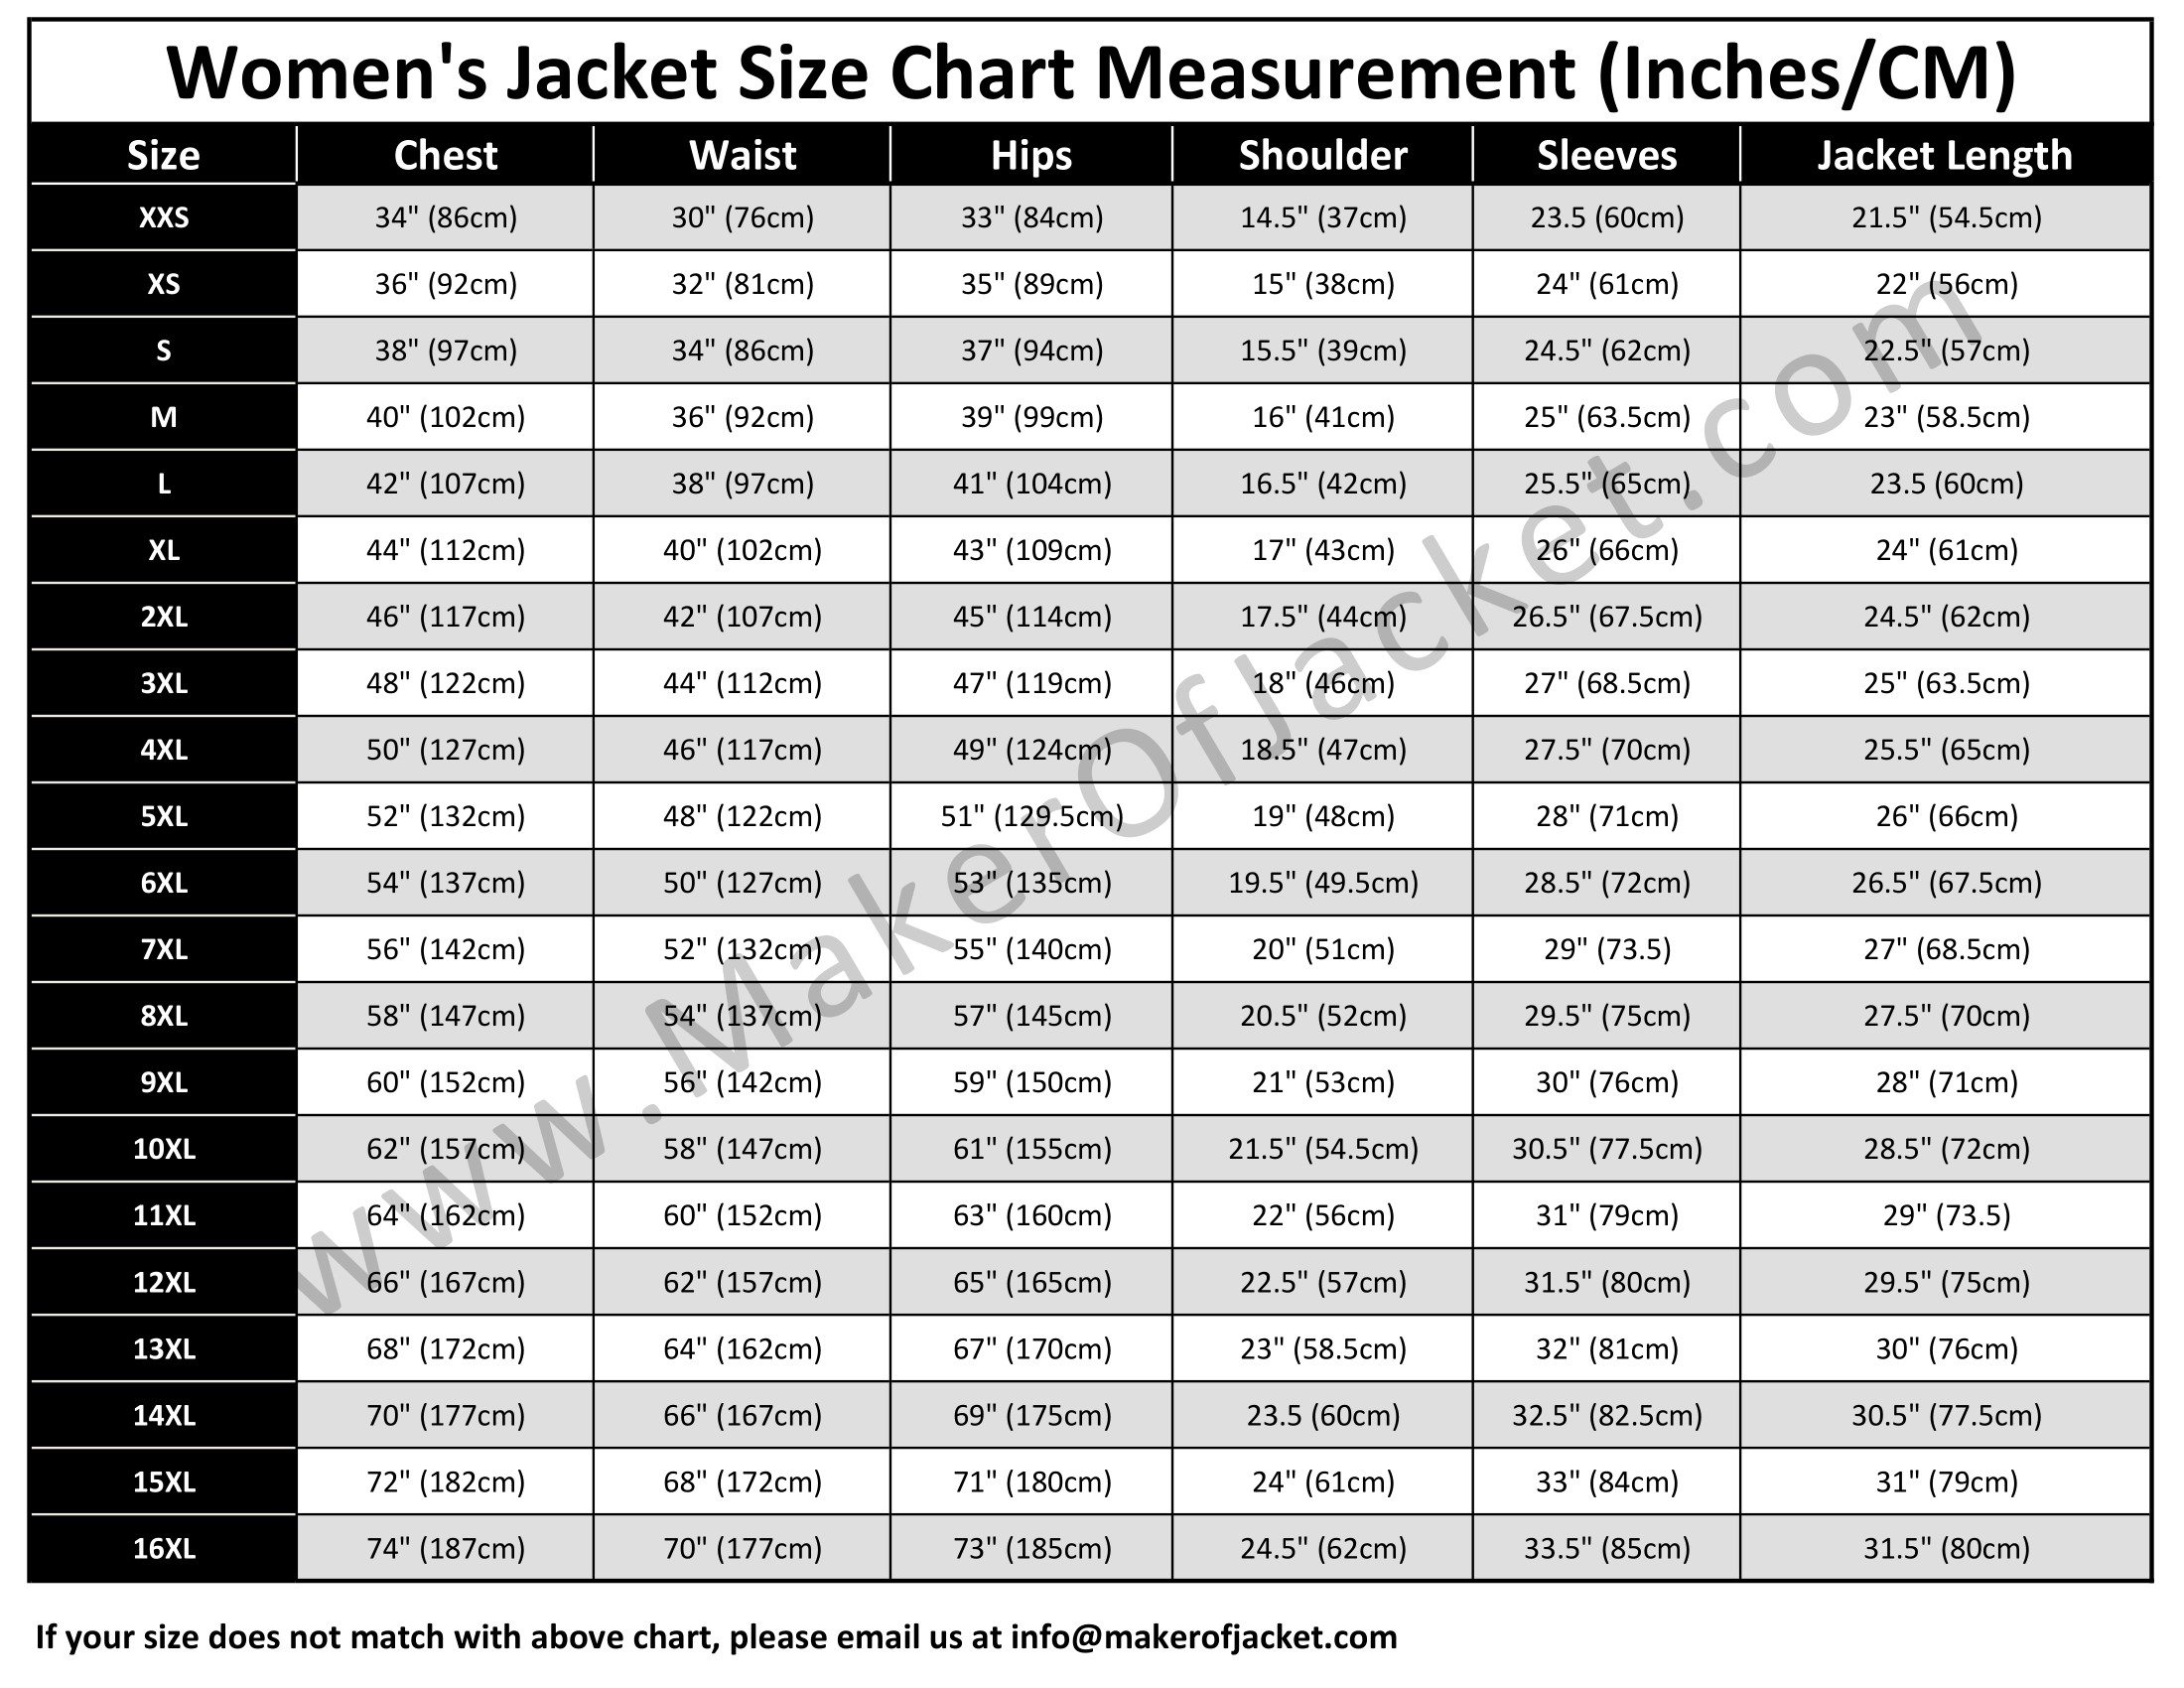 Motorcycle Leather Suit's Size Measurement Guide